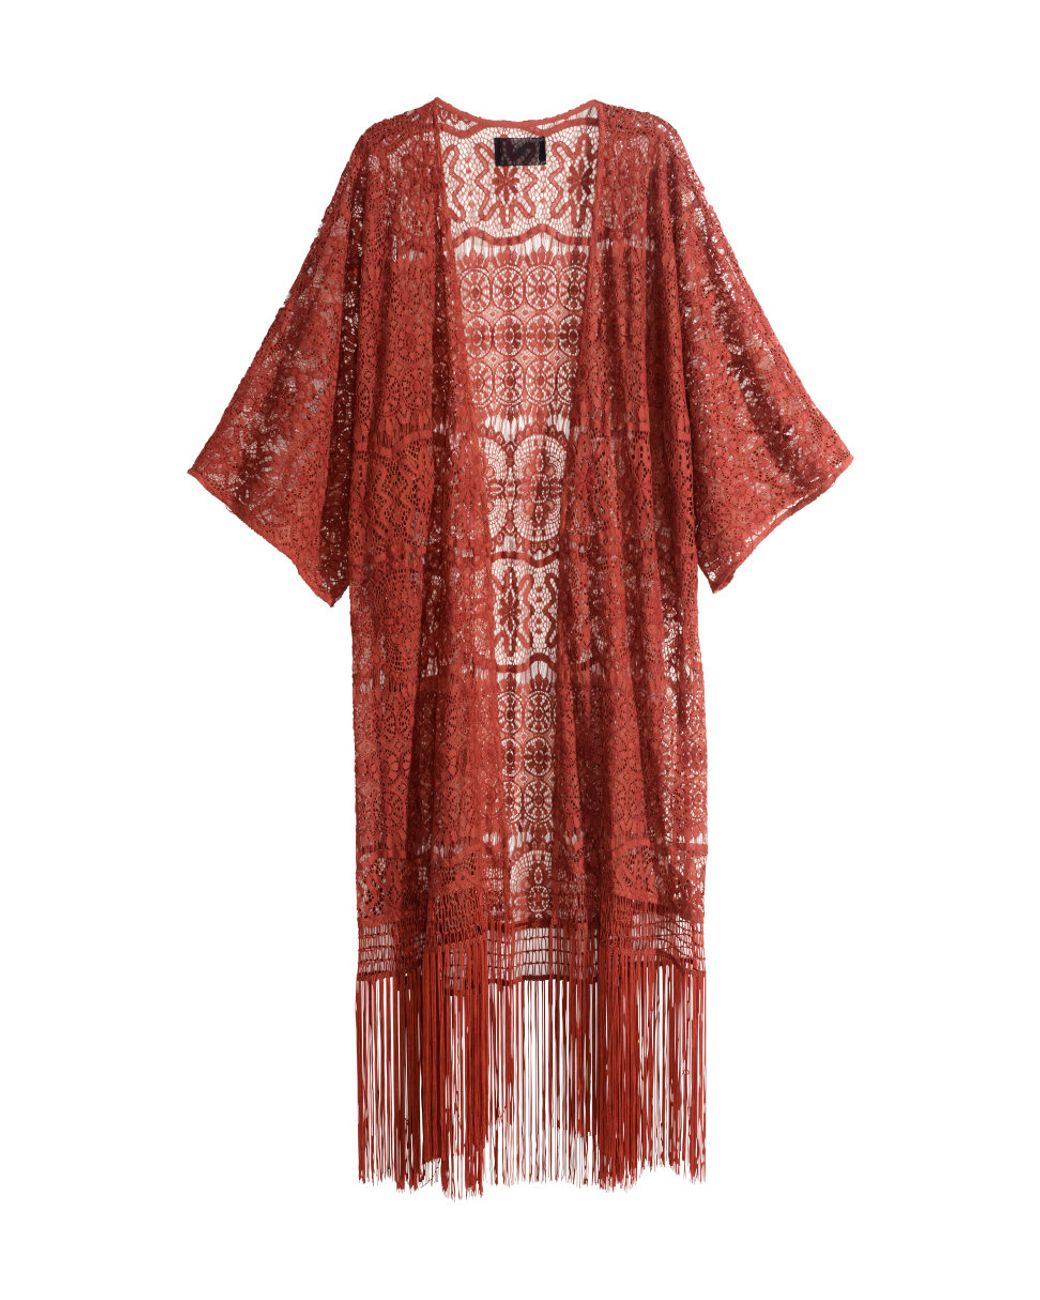 H&M Fringed Lace Kimono in Rust Red (Brown) | Lyst